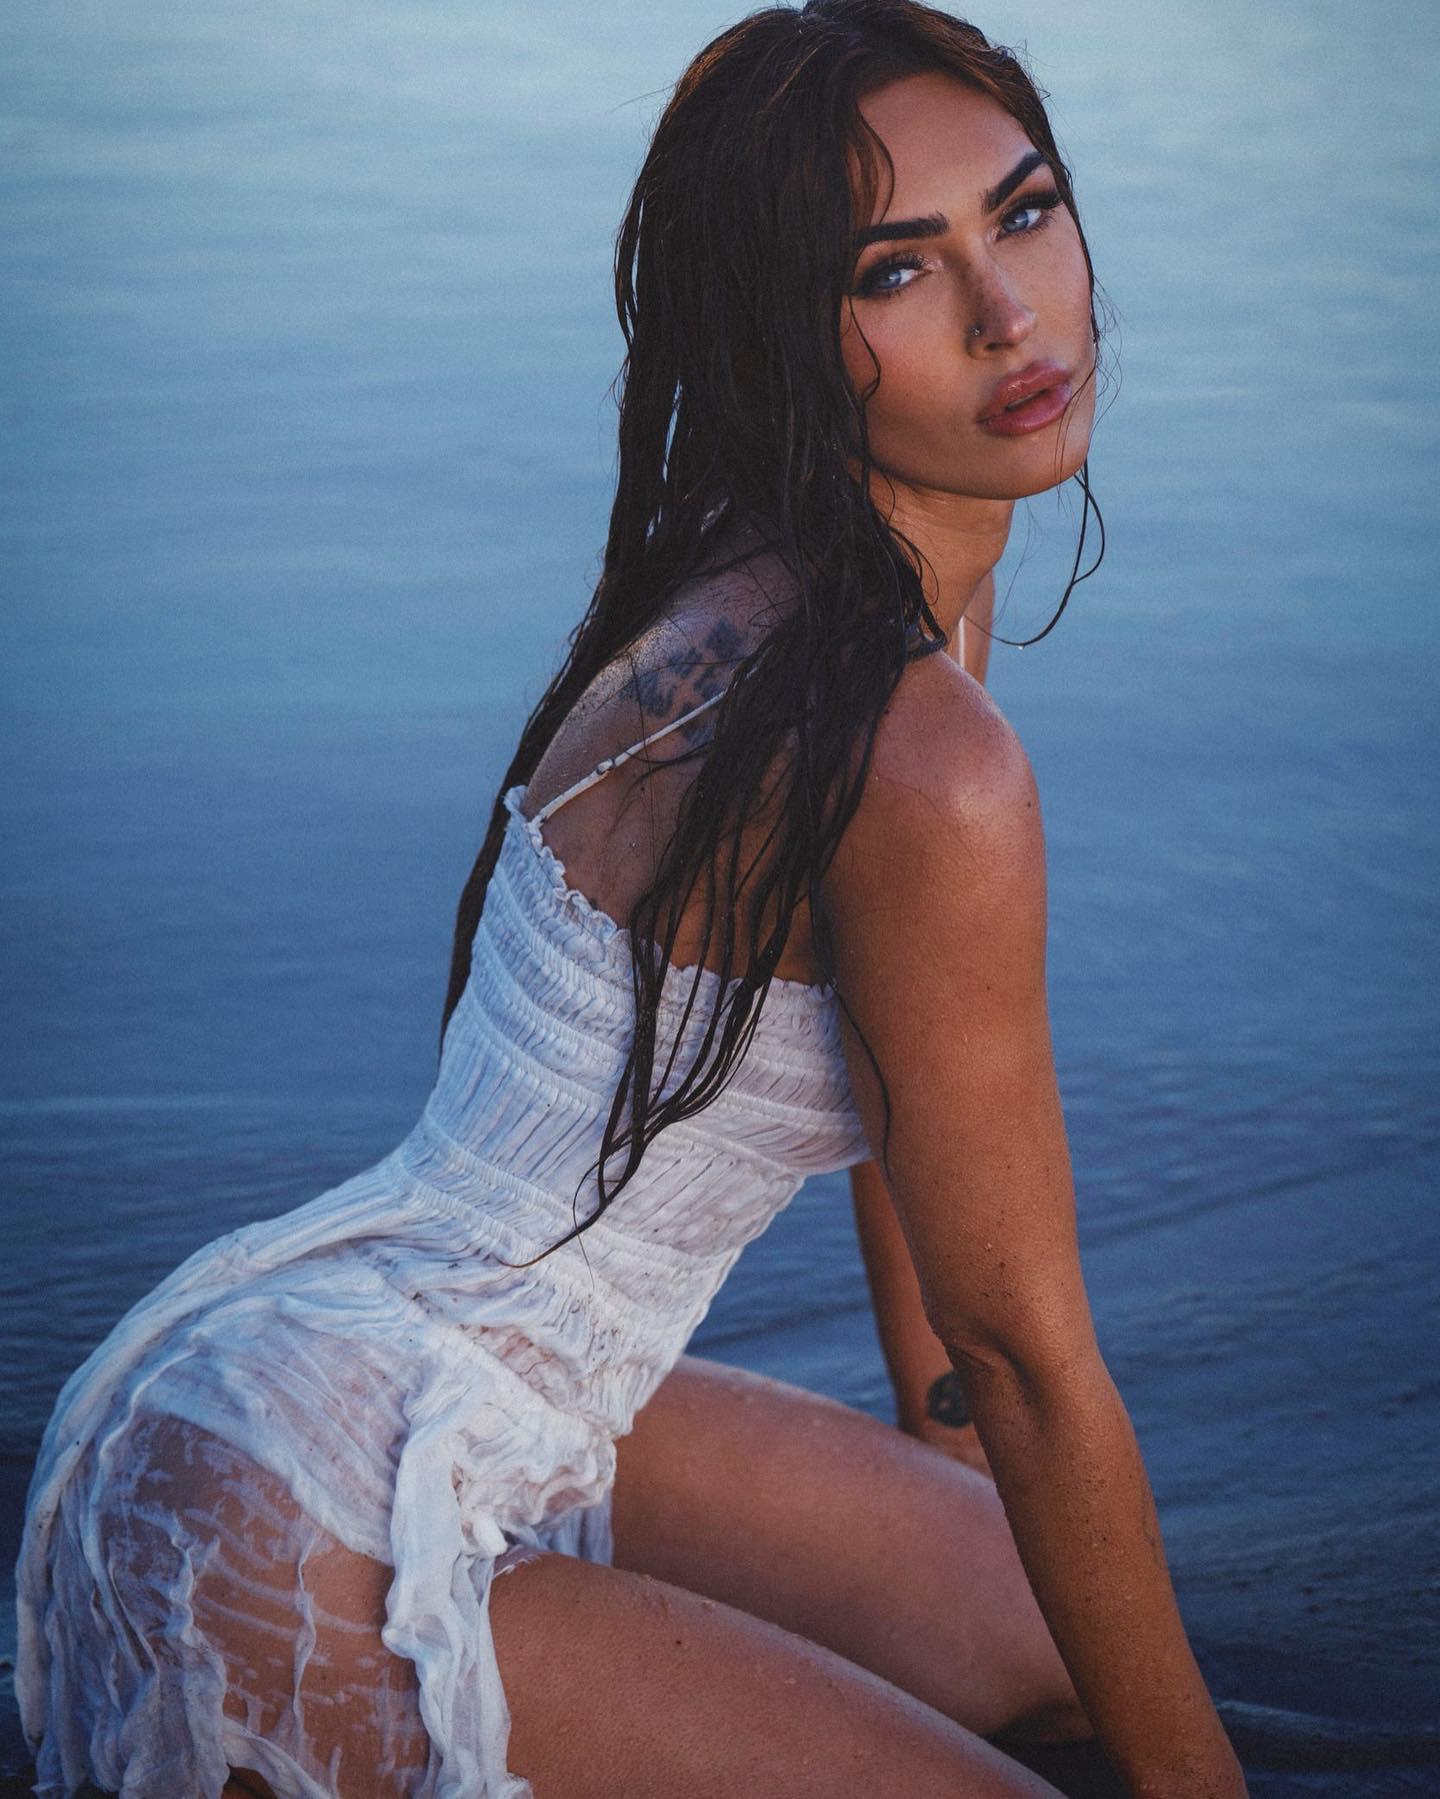 Megan Fox In Wet See-Through Dress Is ‘Offering Surf Lessons’